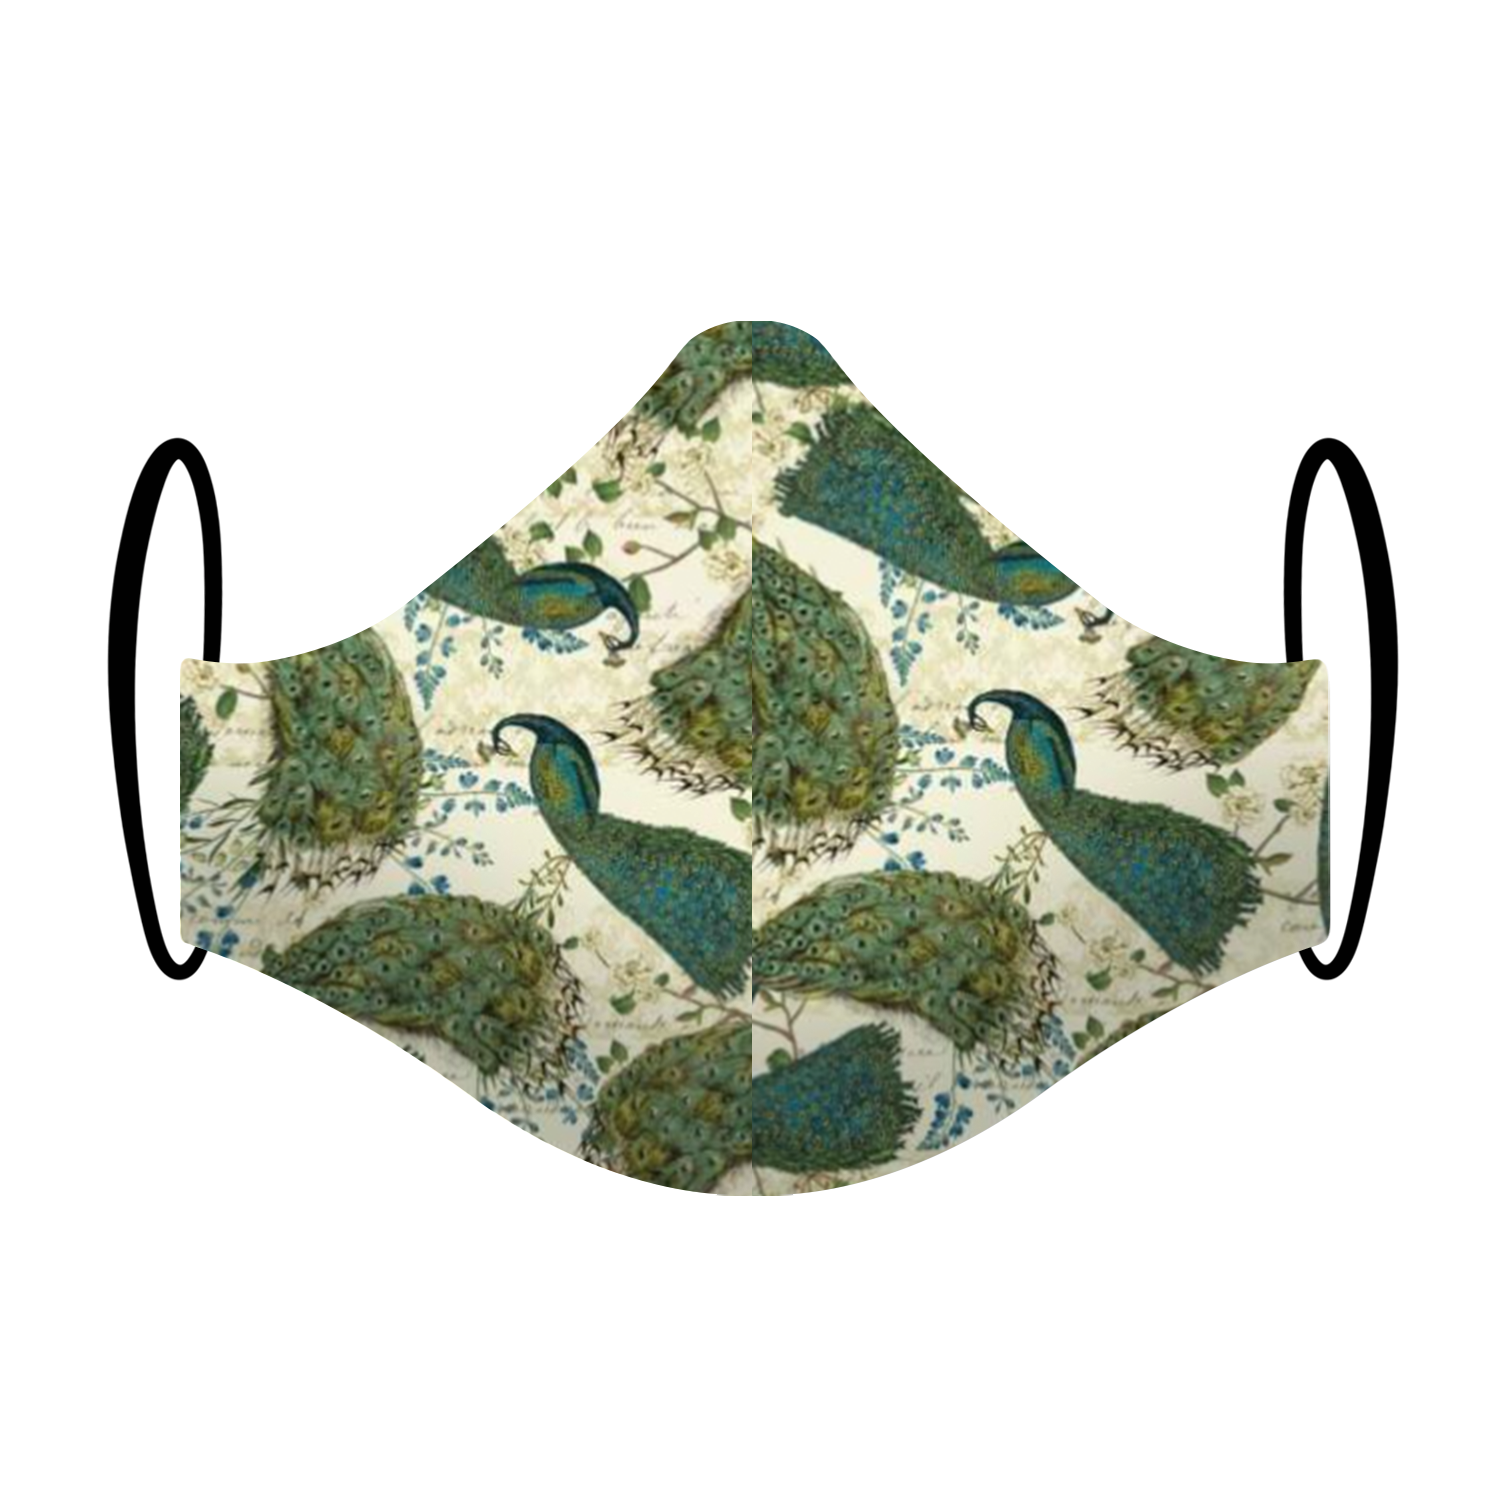 Triple layered face mask made in Melbourne Australia from cotton and poplin featuring a unique peacock print